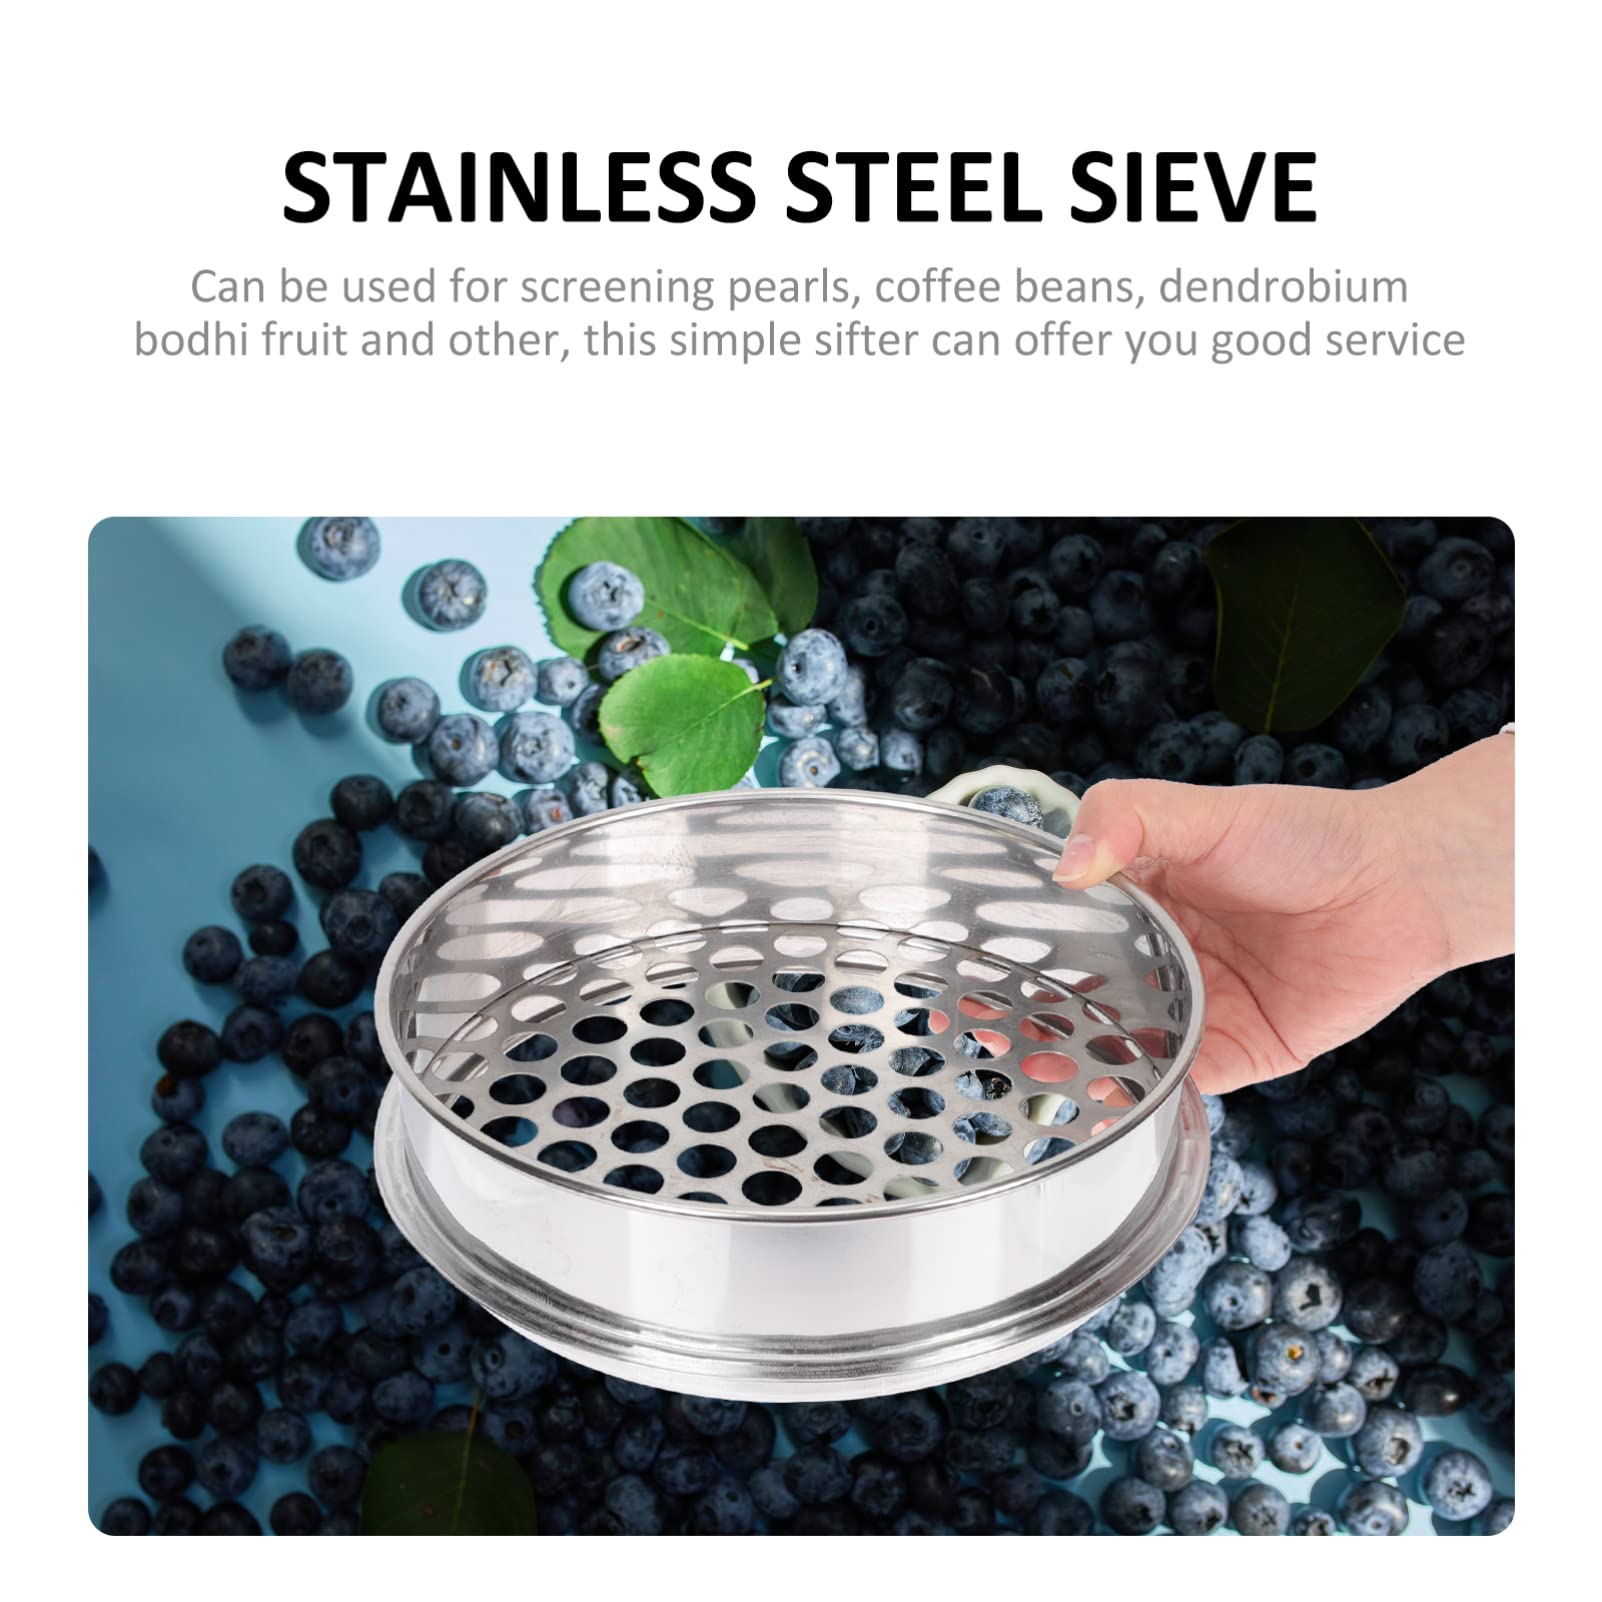 Veemoon Round Hole Sieve Stainless Steel Soil Sieve Kitchen Food Bean Sifter Sand Sifter Sand Sifter Riddle Gardening Mesh Filter Blueberry Sieve for Home Kitchen Garden Use